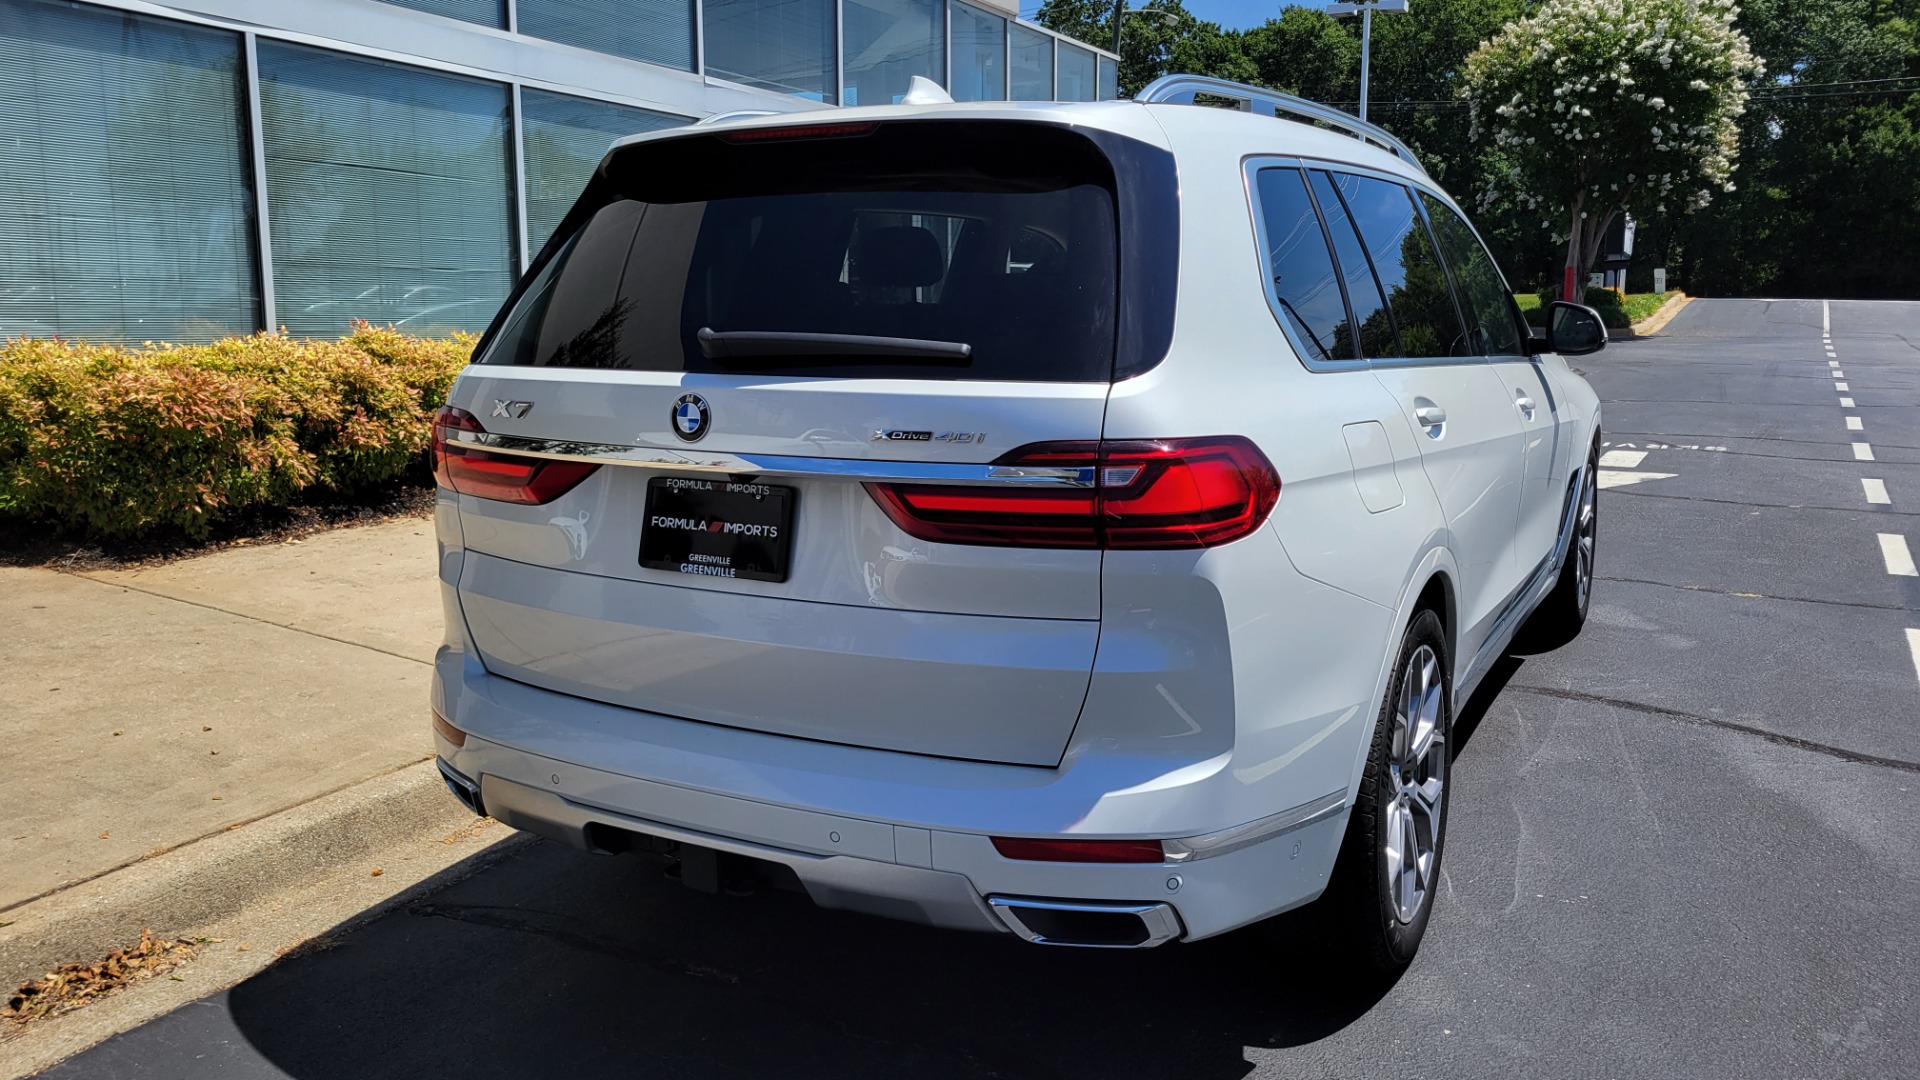 Used 2019 BMW X7 XDRIVE40I PREMIUM / NAV / HUD / PARK ASST PLUS / REMOTE START / 3D VIEW for sale $68,995 at Formula Imports in Charlotte NC 28227 8